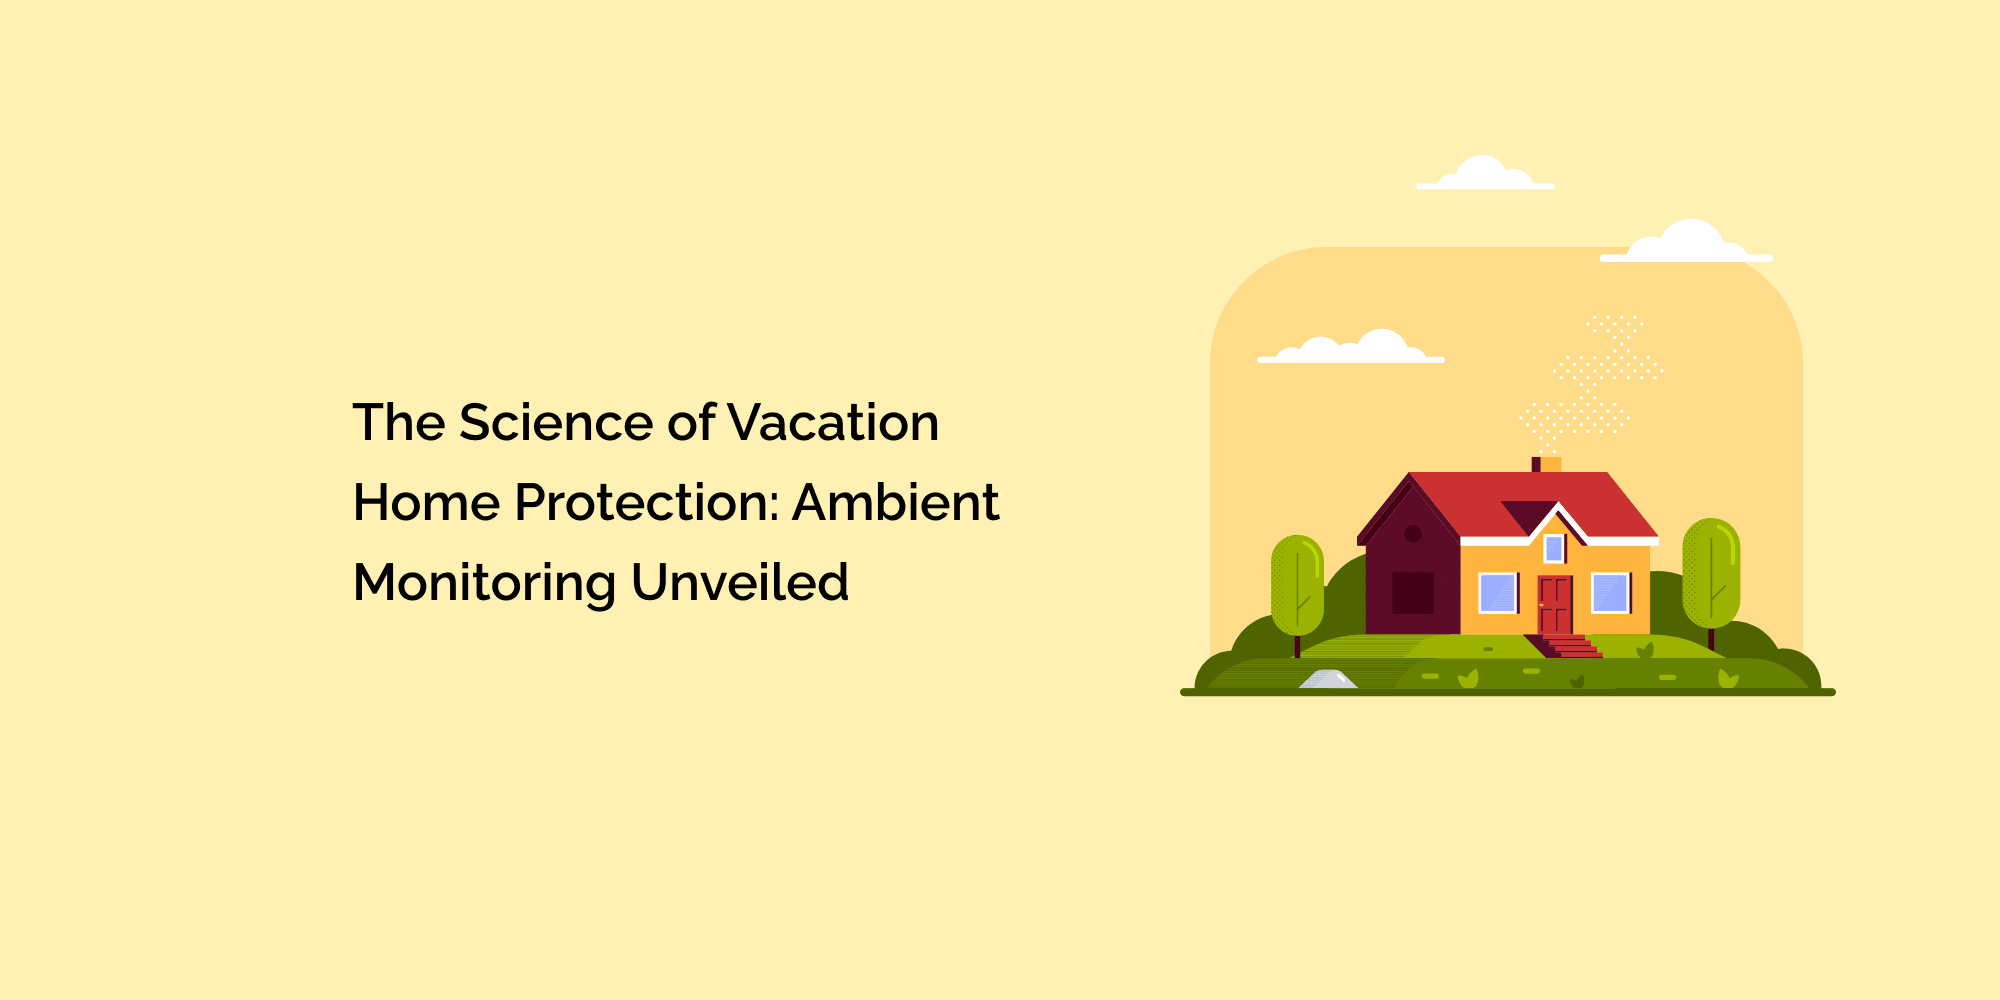 The Science of Vacation Home Protection: Ambient Monitoring Unveiled